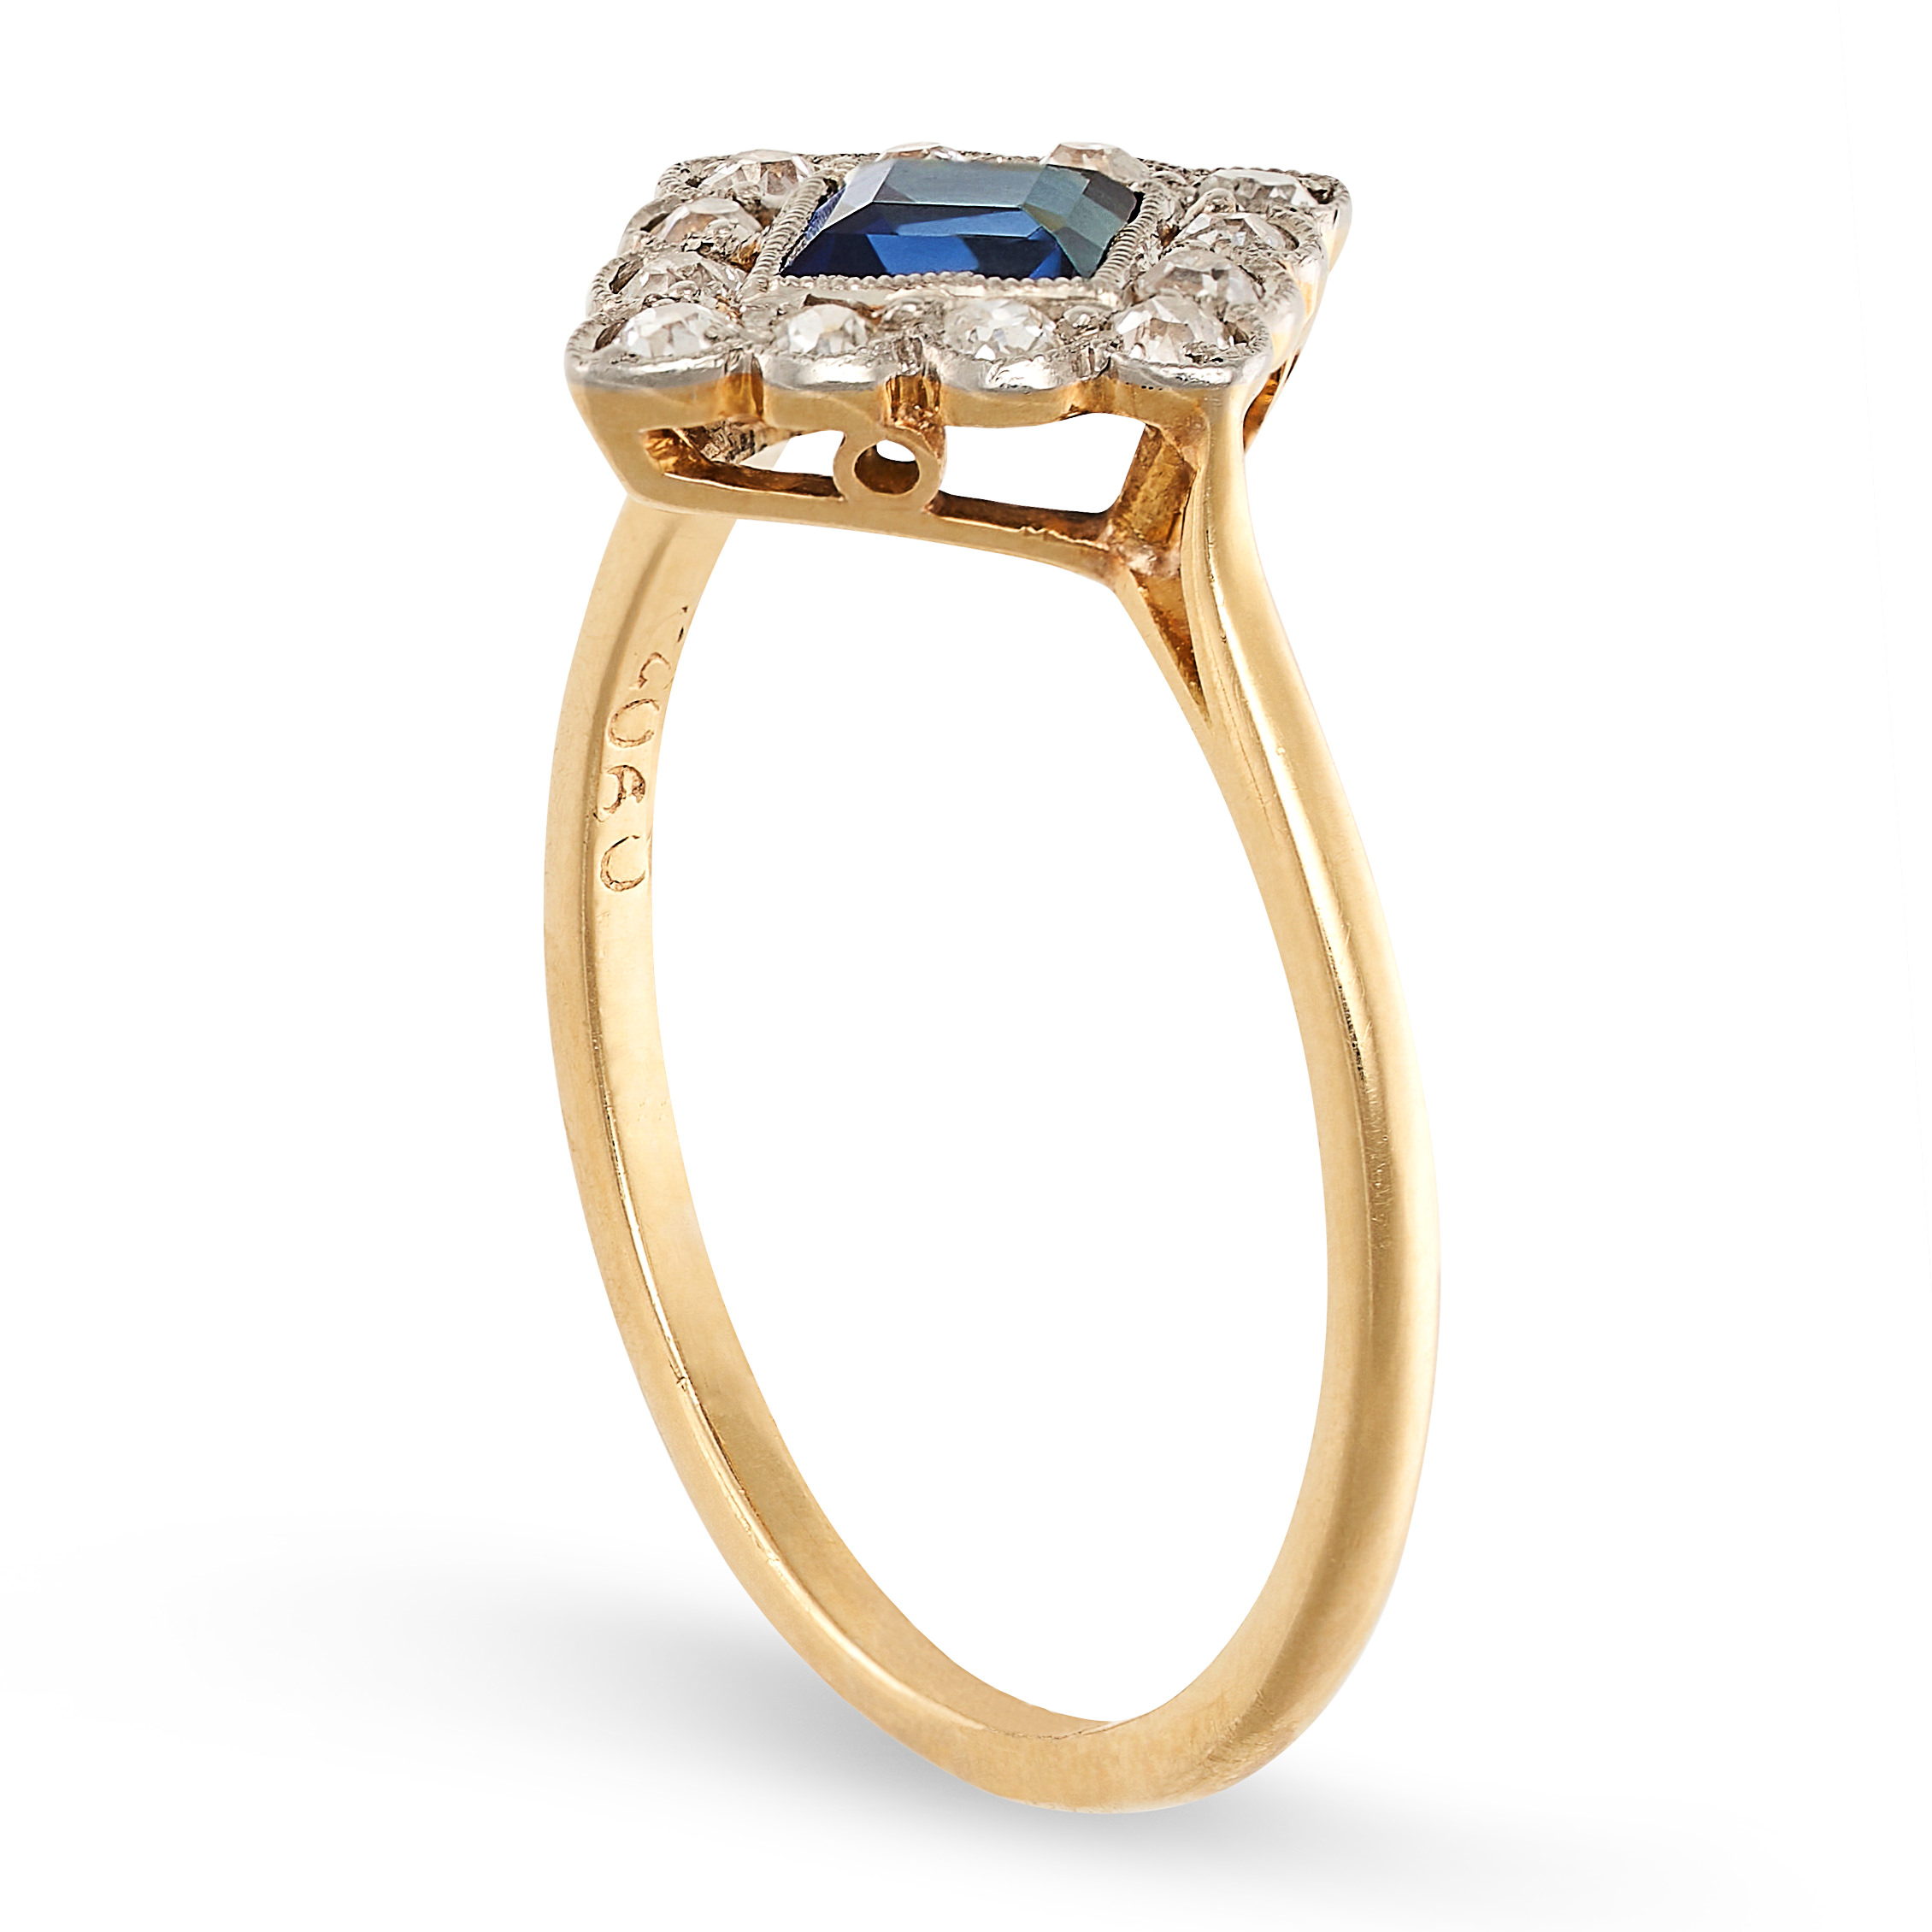 AN ART DECO SAPPHIRE AND DIAMOND RING in 18ct yellow and white gold, set with a square step cut - Image 2 of 2